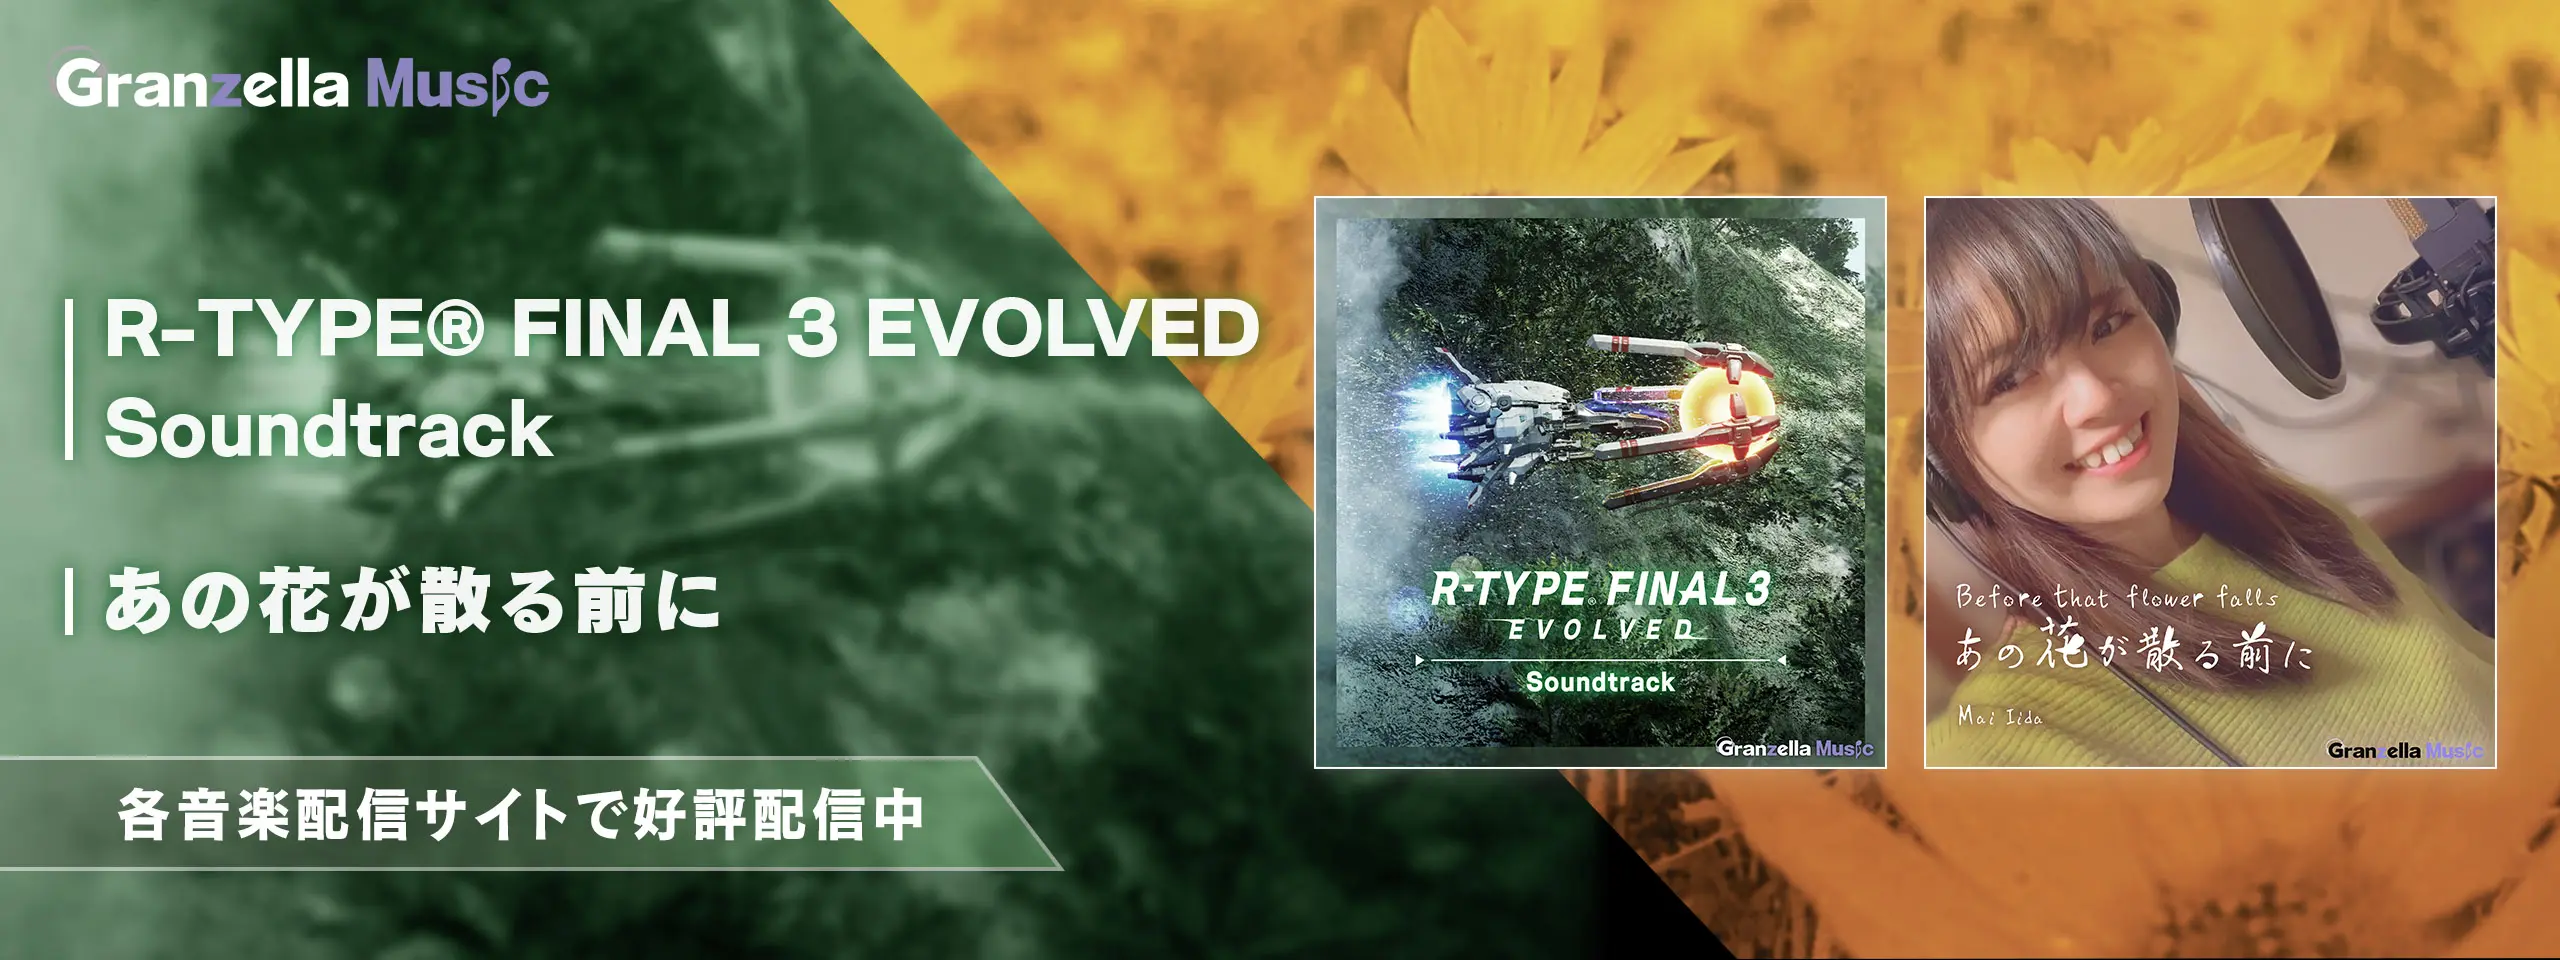 R-TYPE FINAL3 EVOLVED Soundtrack あの花が散る前に